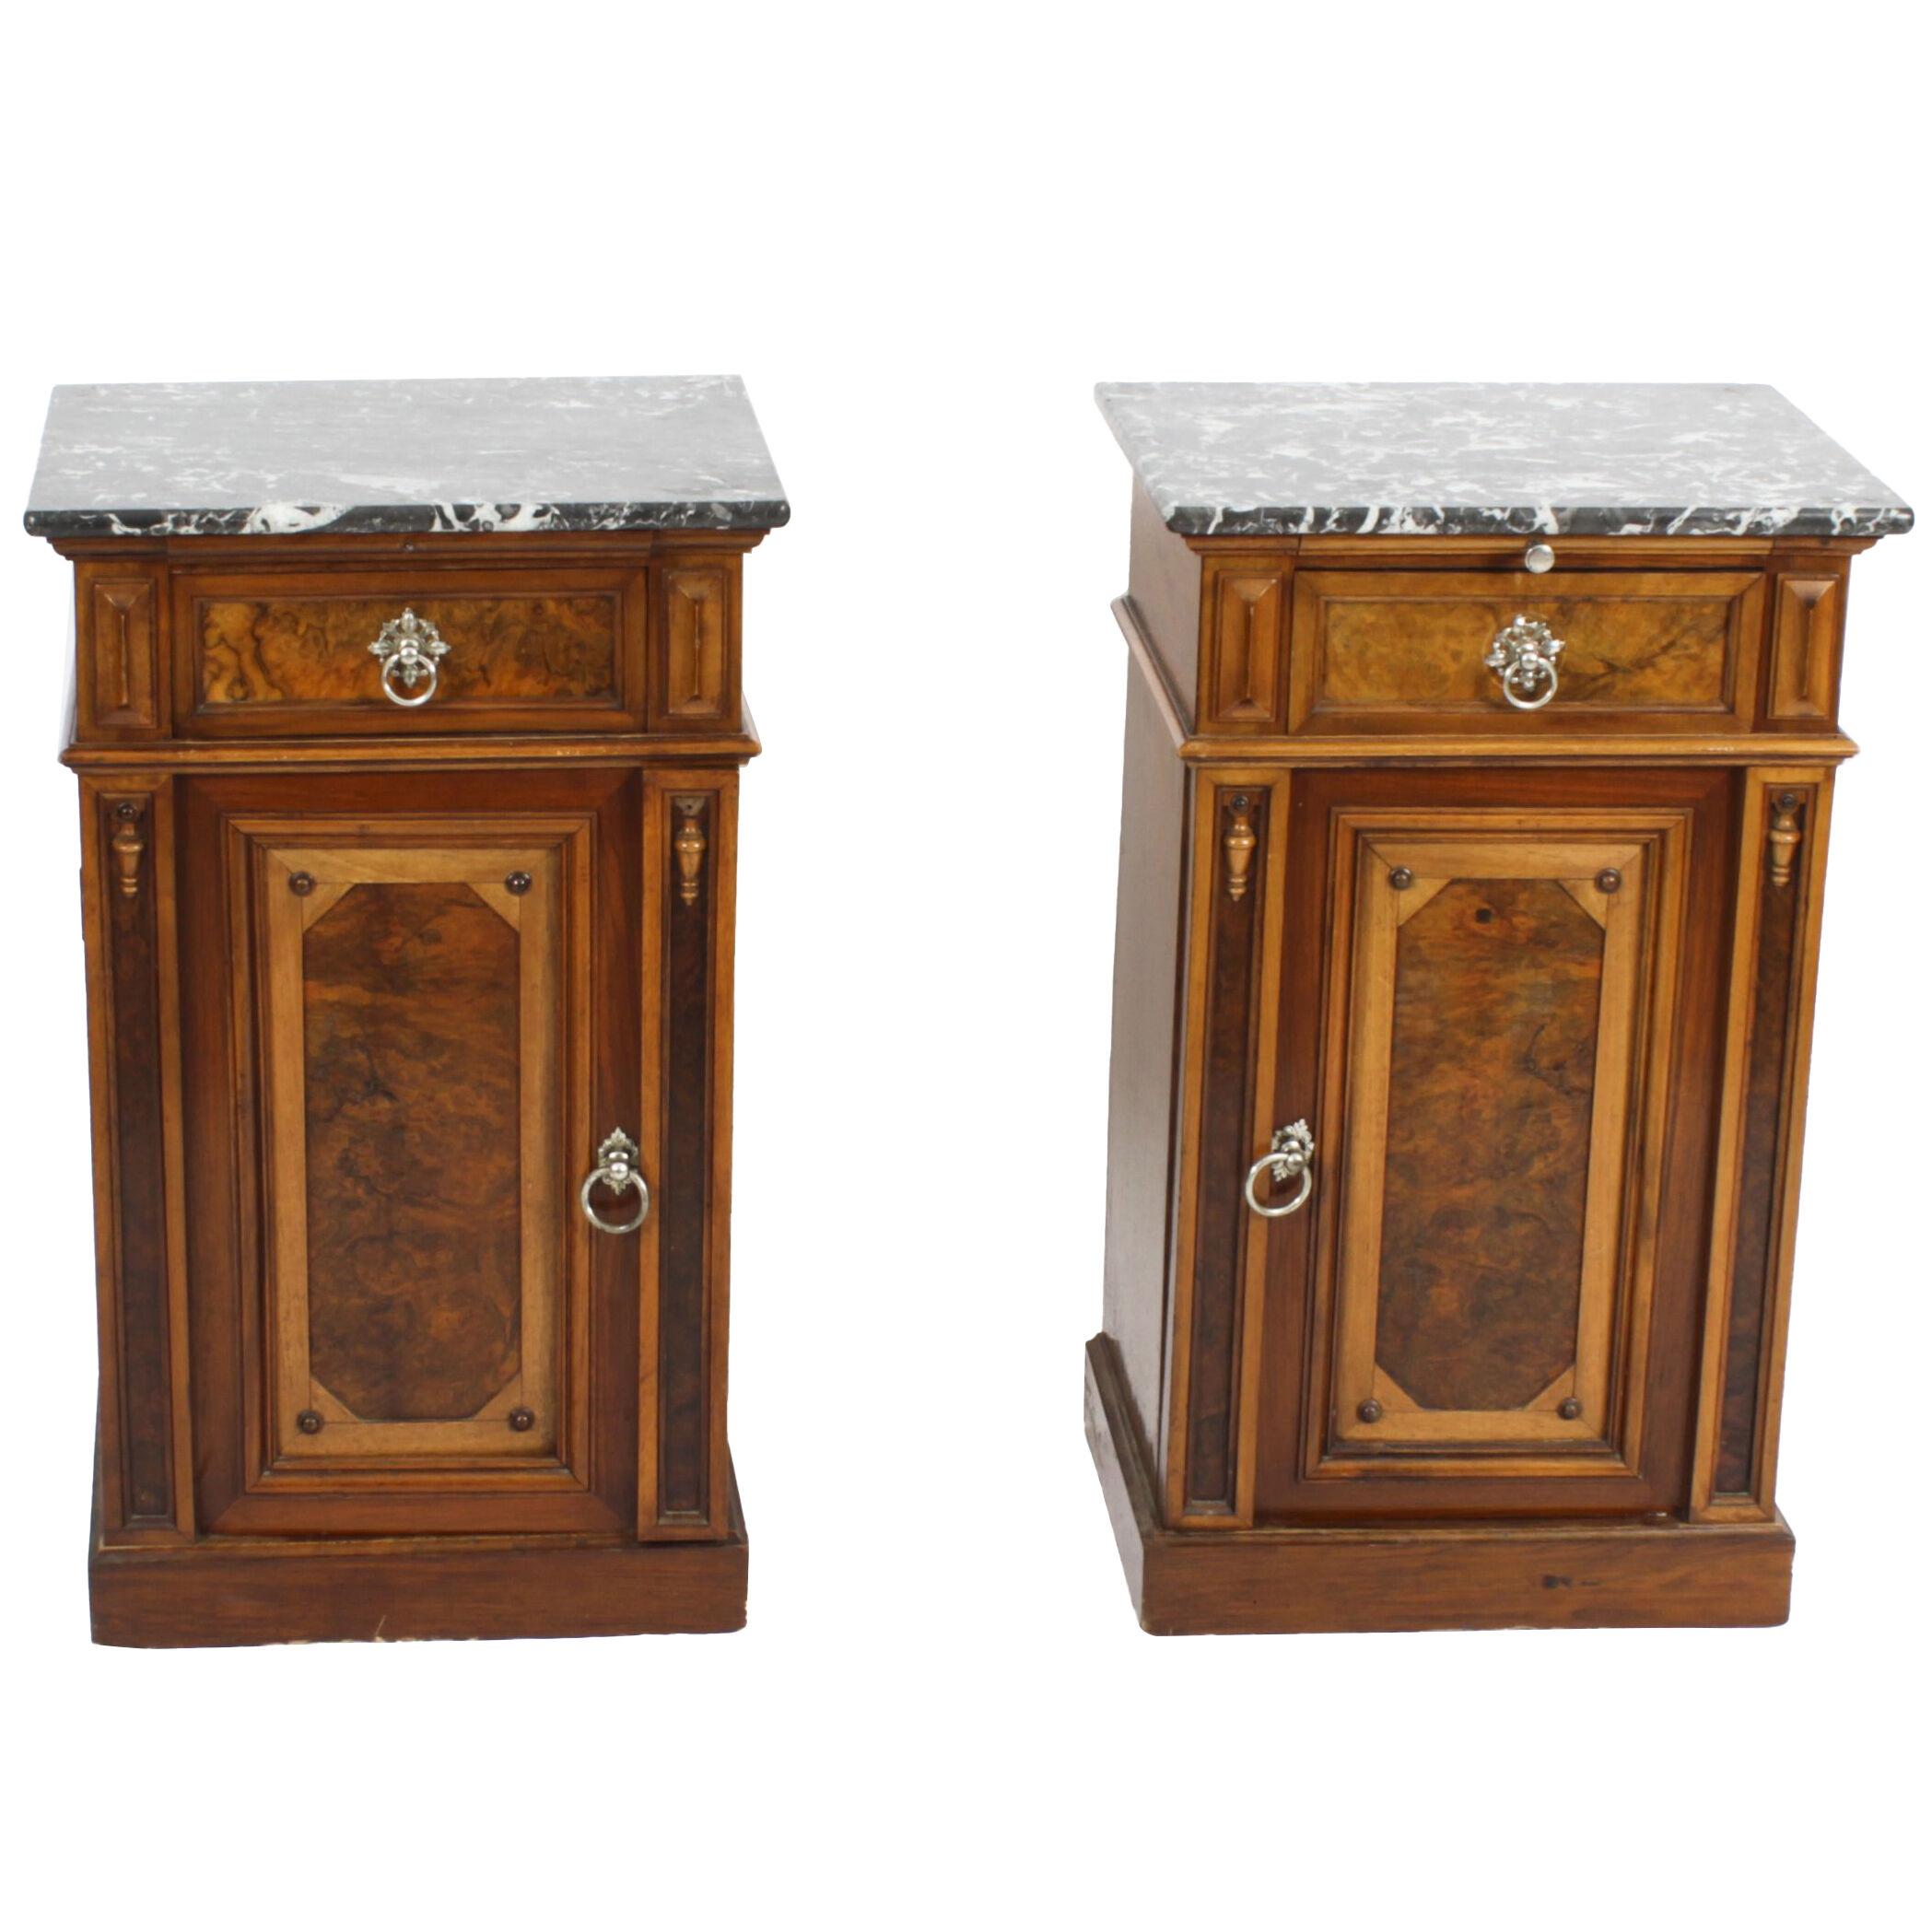 Antique Pair French Bedside Cabinets Marble Tops 19thC